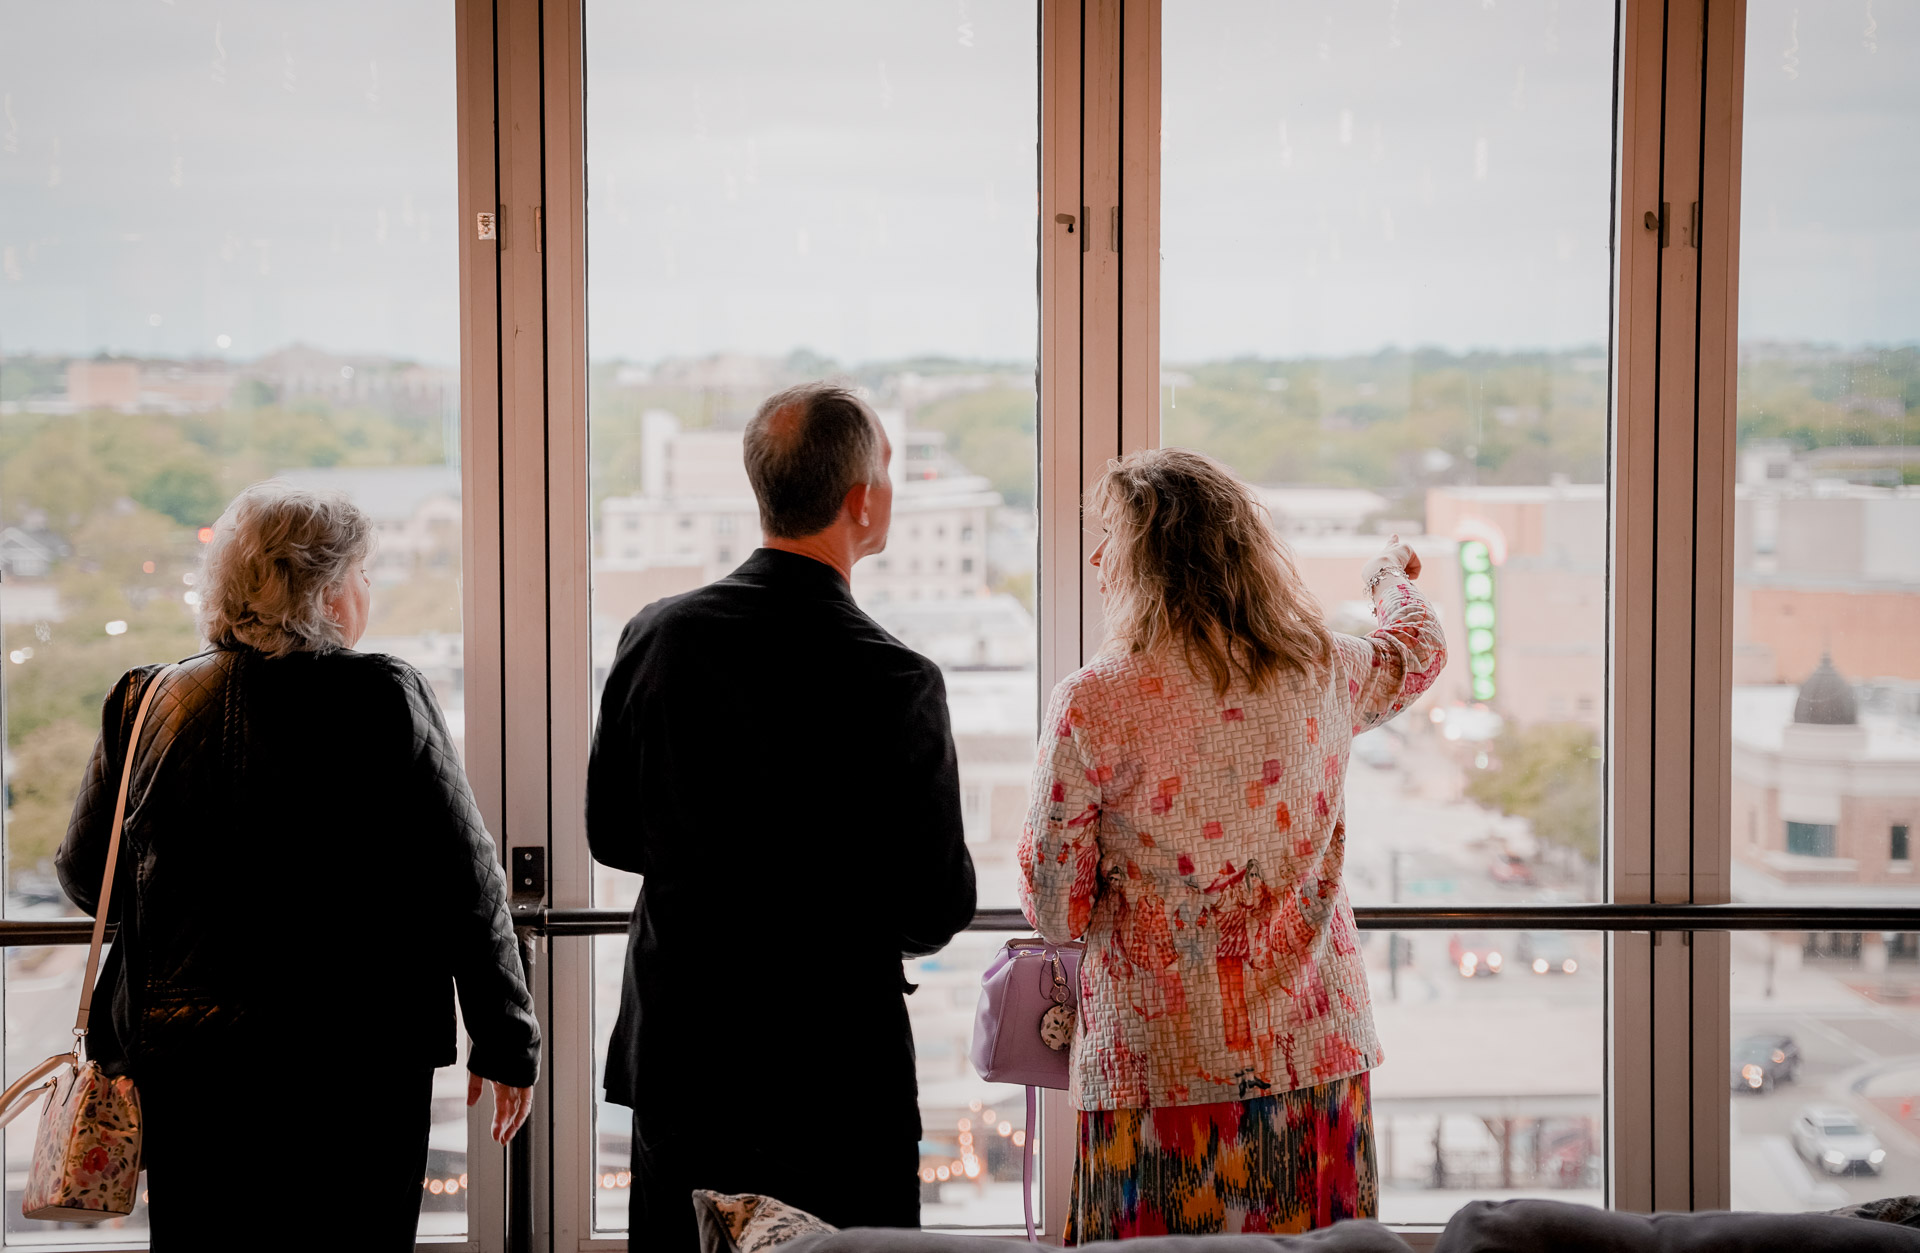 Three people looking out a window over a city